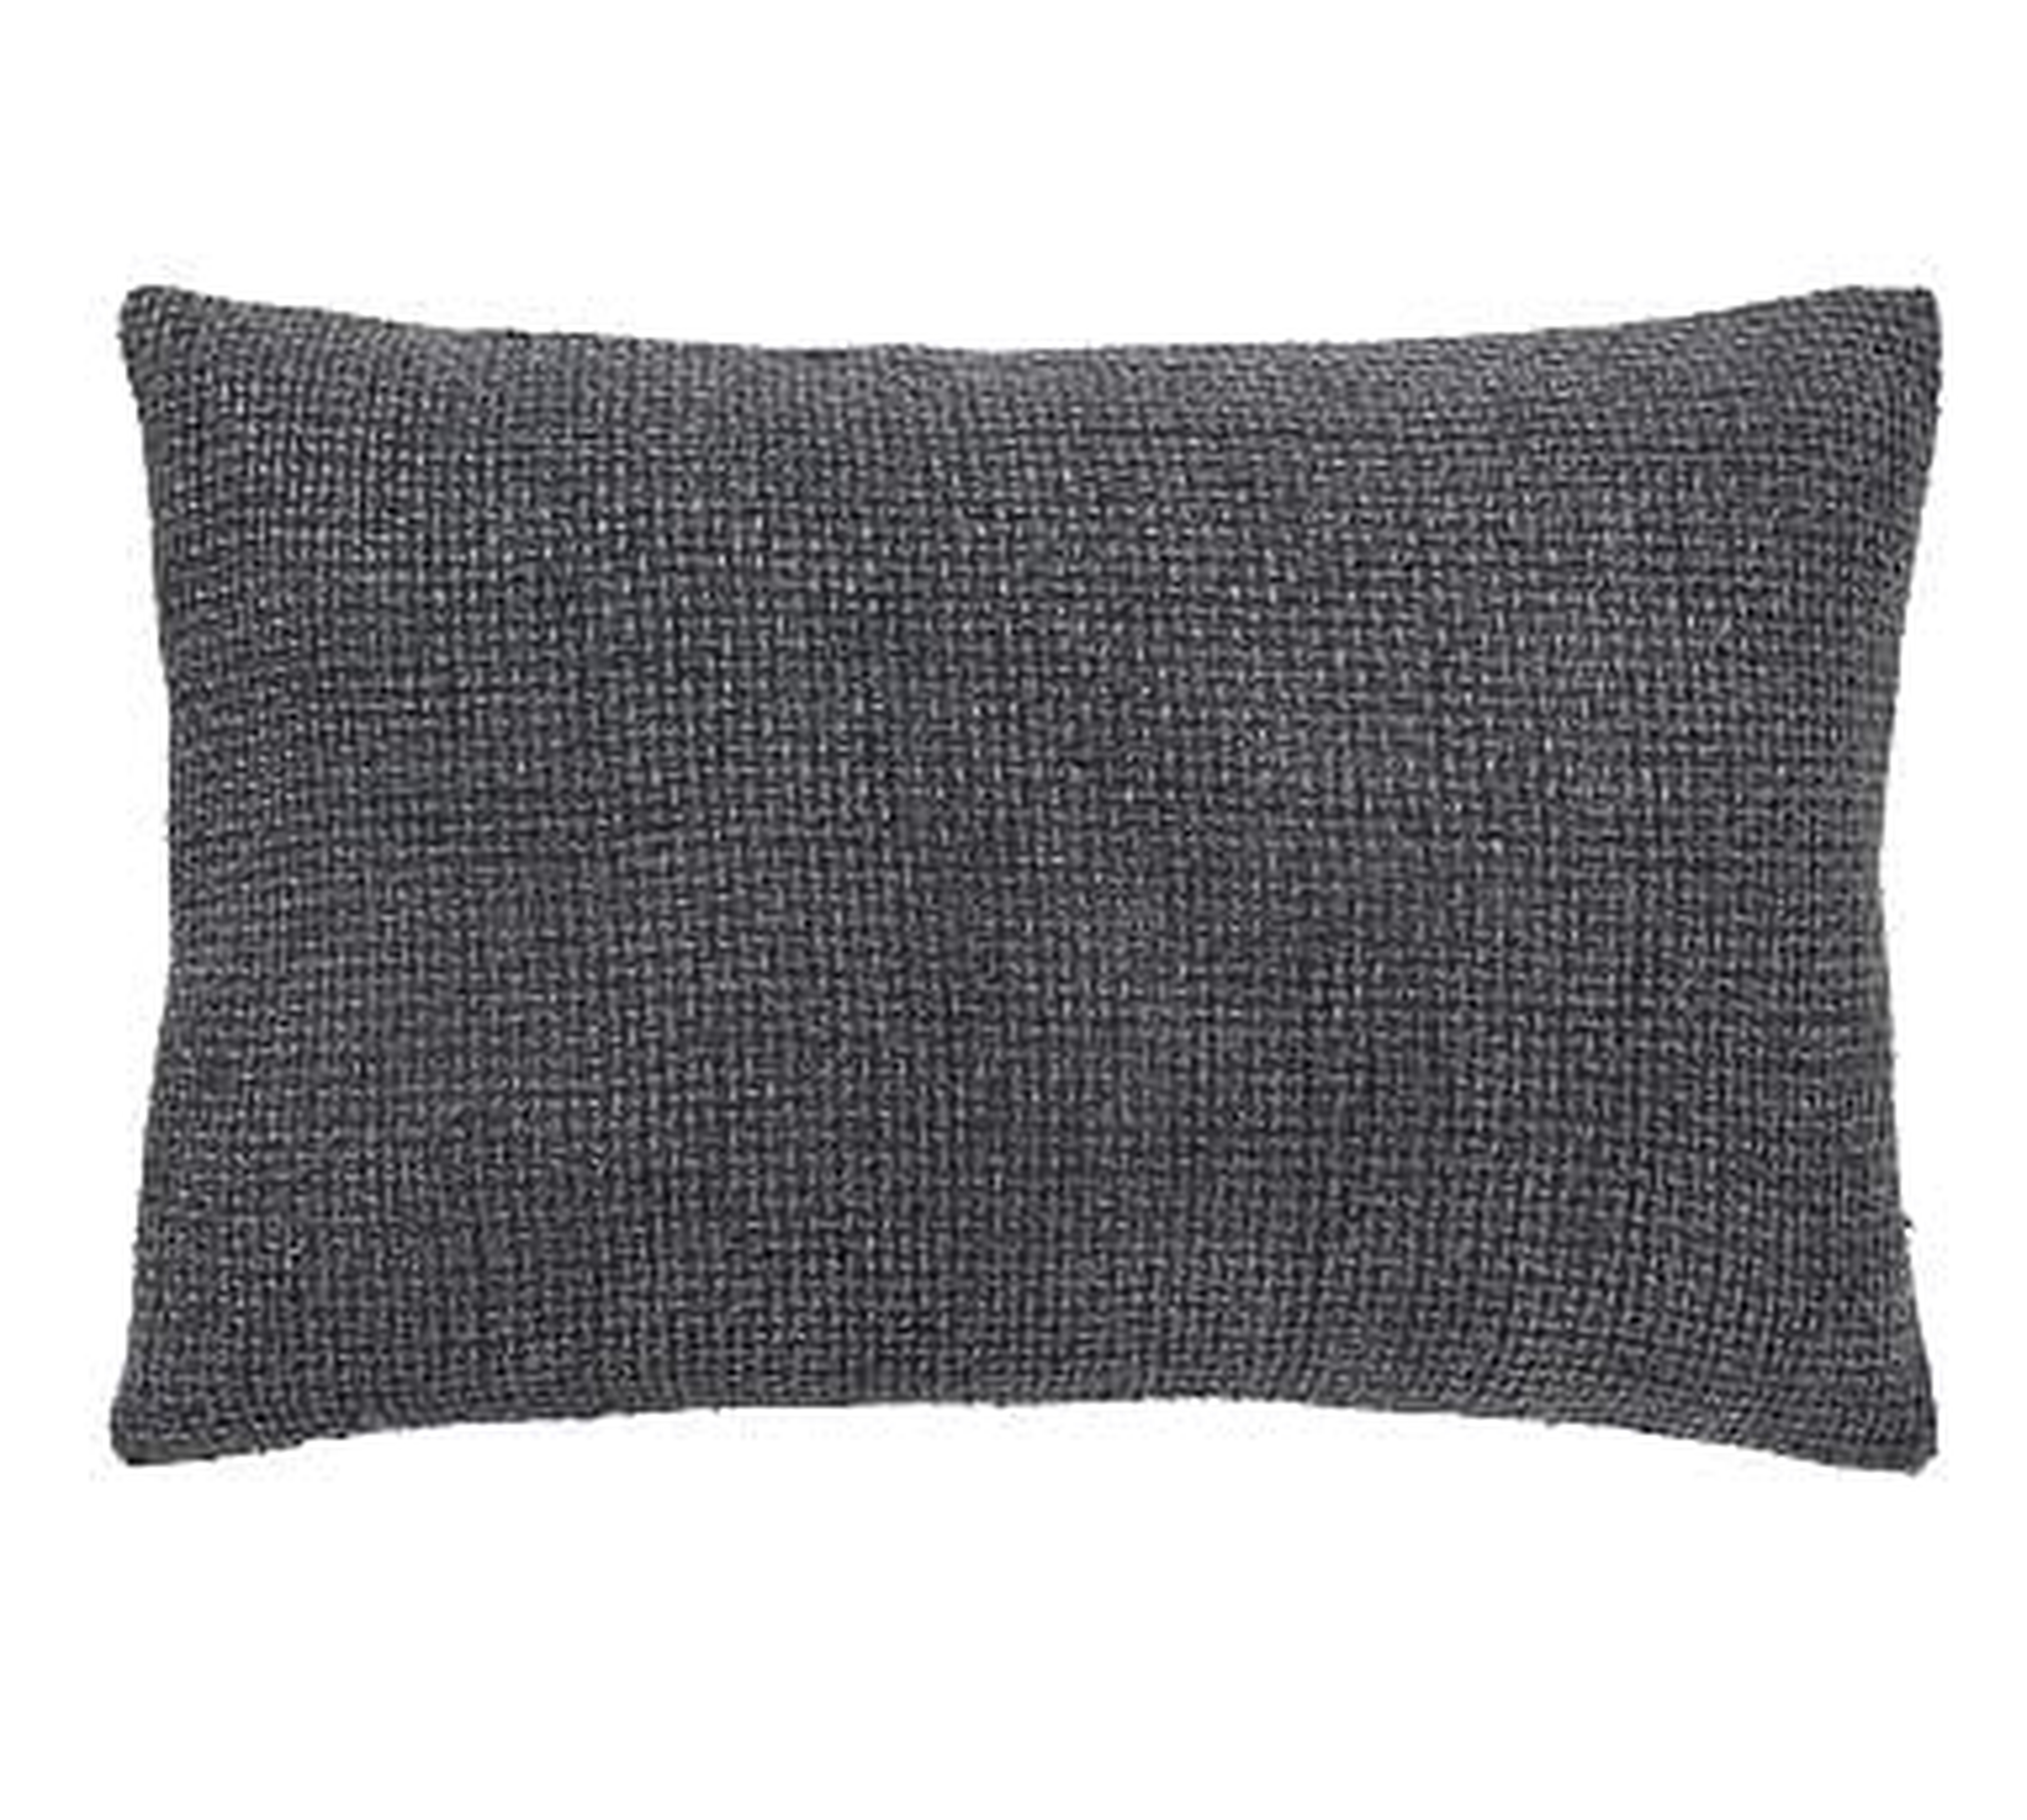 Dylan Textured Lumbar Pillow Cover, 16" x 26", Graphite - Pottery Barn